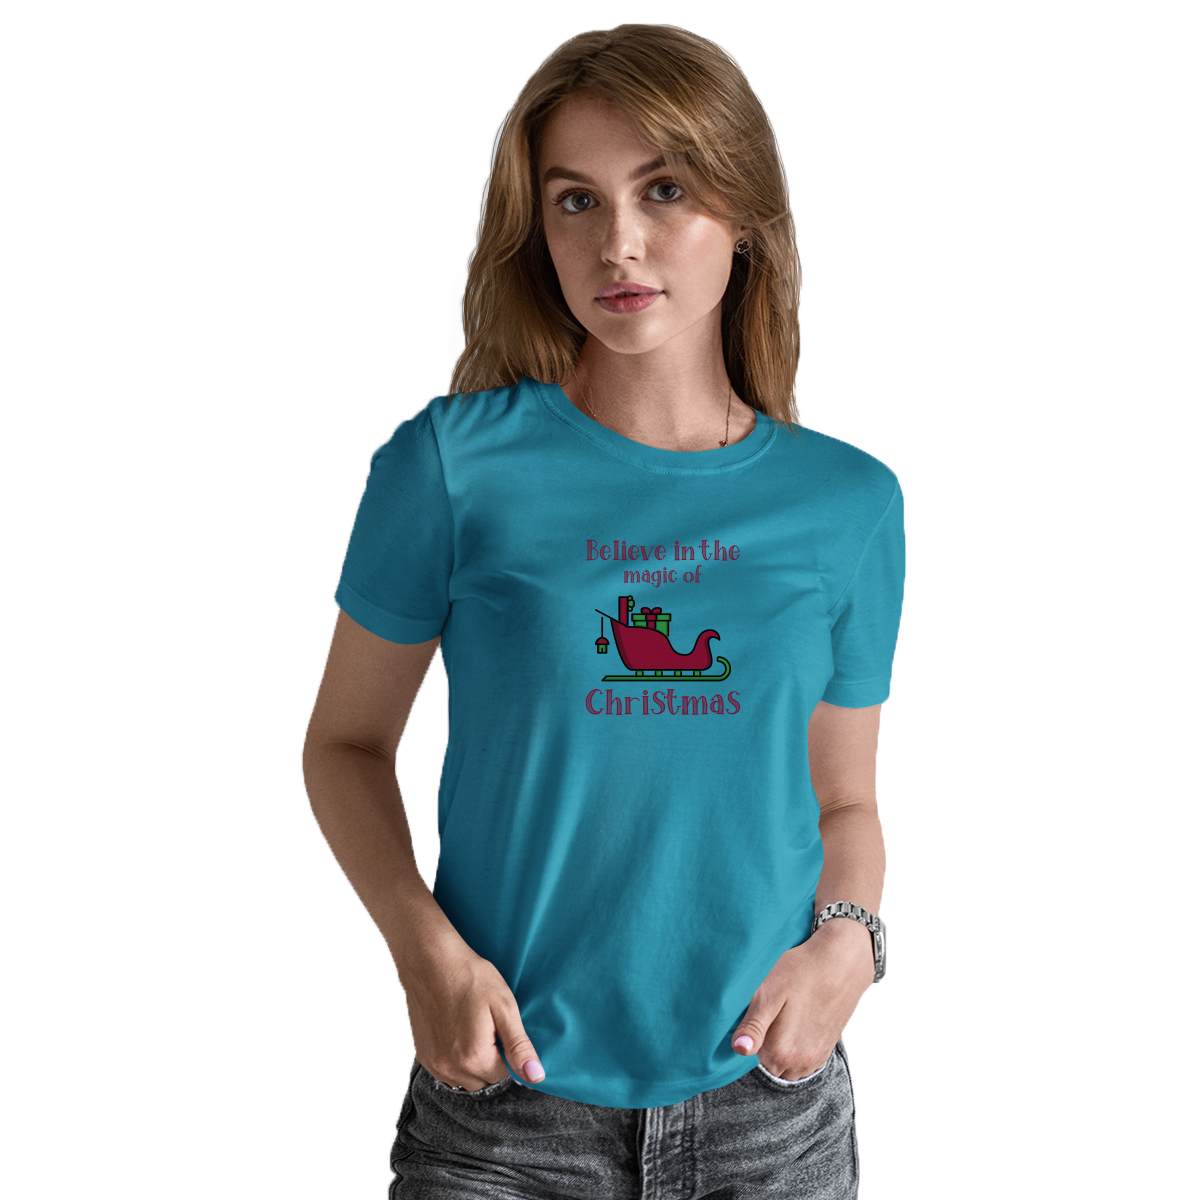 Believe in the Magic of Christmas Women's T-shirt | Turquoise